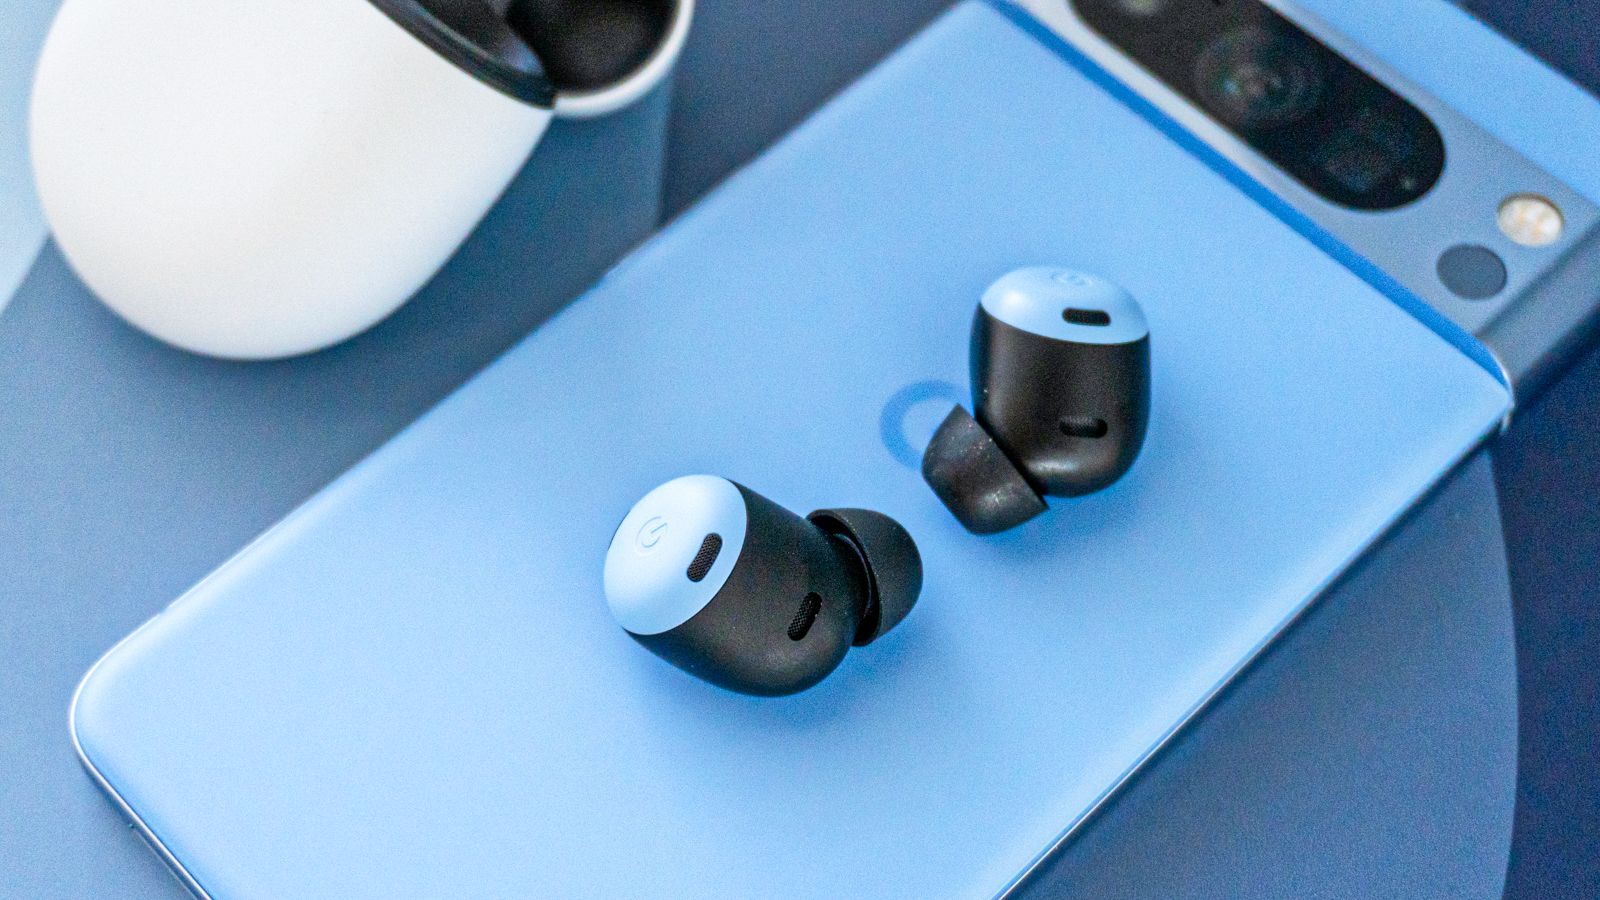 Google Pixel Buds Pro review: Great Android earbuds can't keep up